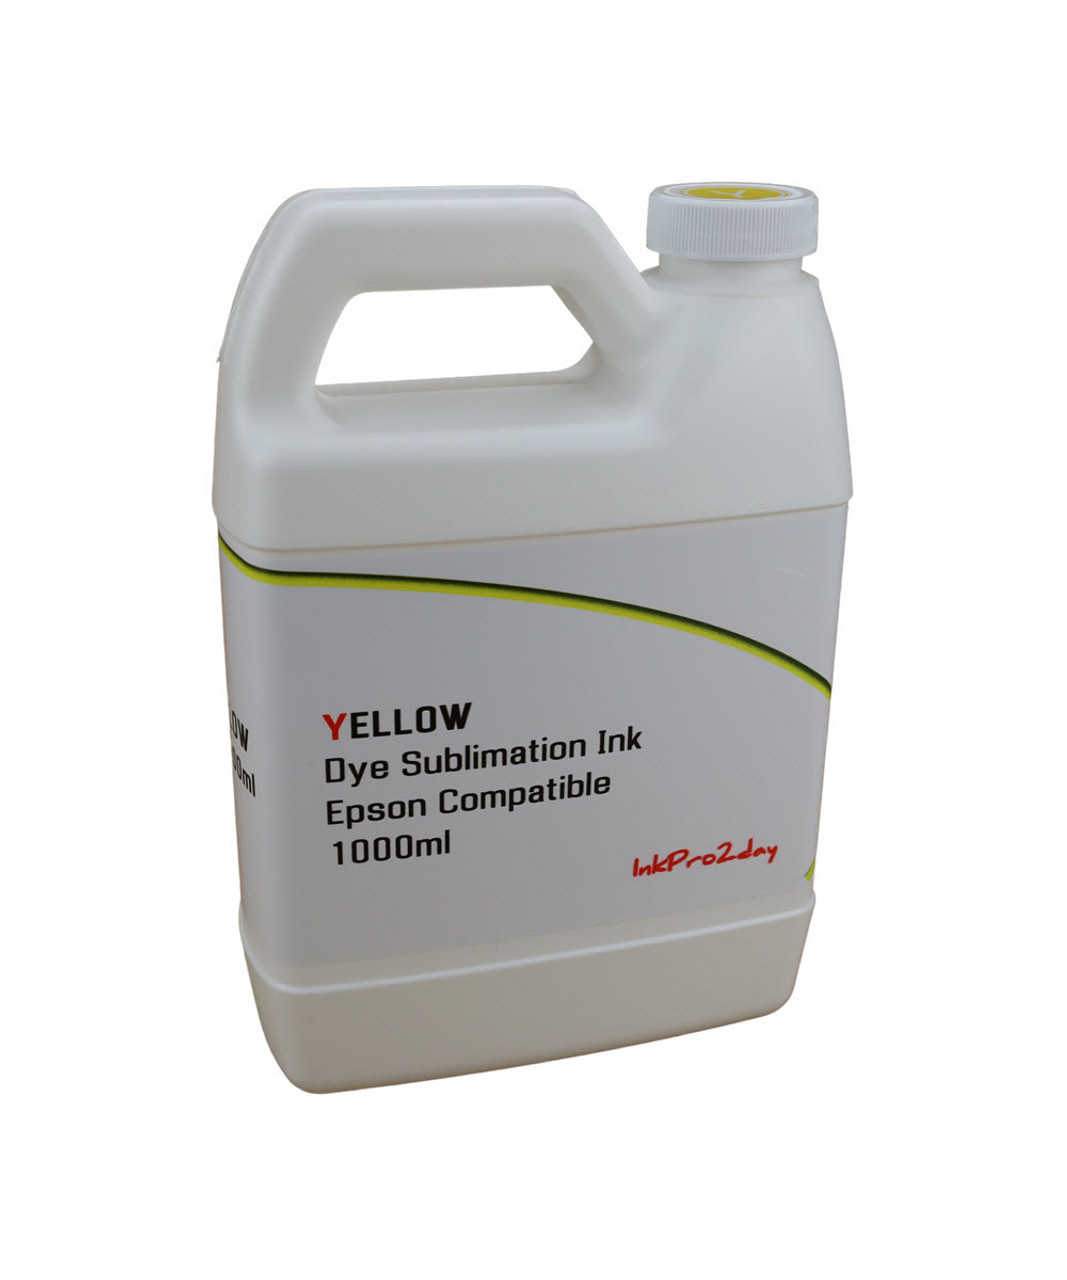 Yellow 1000ml Bottle Dye Sublimation Ink for Epson WorkForce WF-7210, WorkForce WF-7710, WorkForce WF-7720 Printers